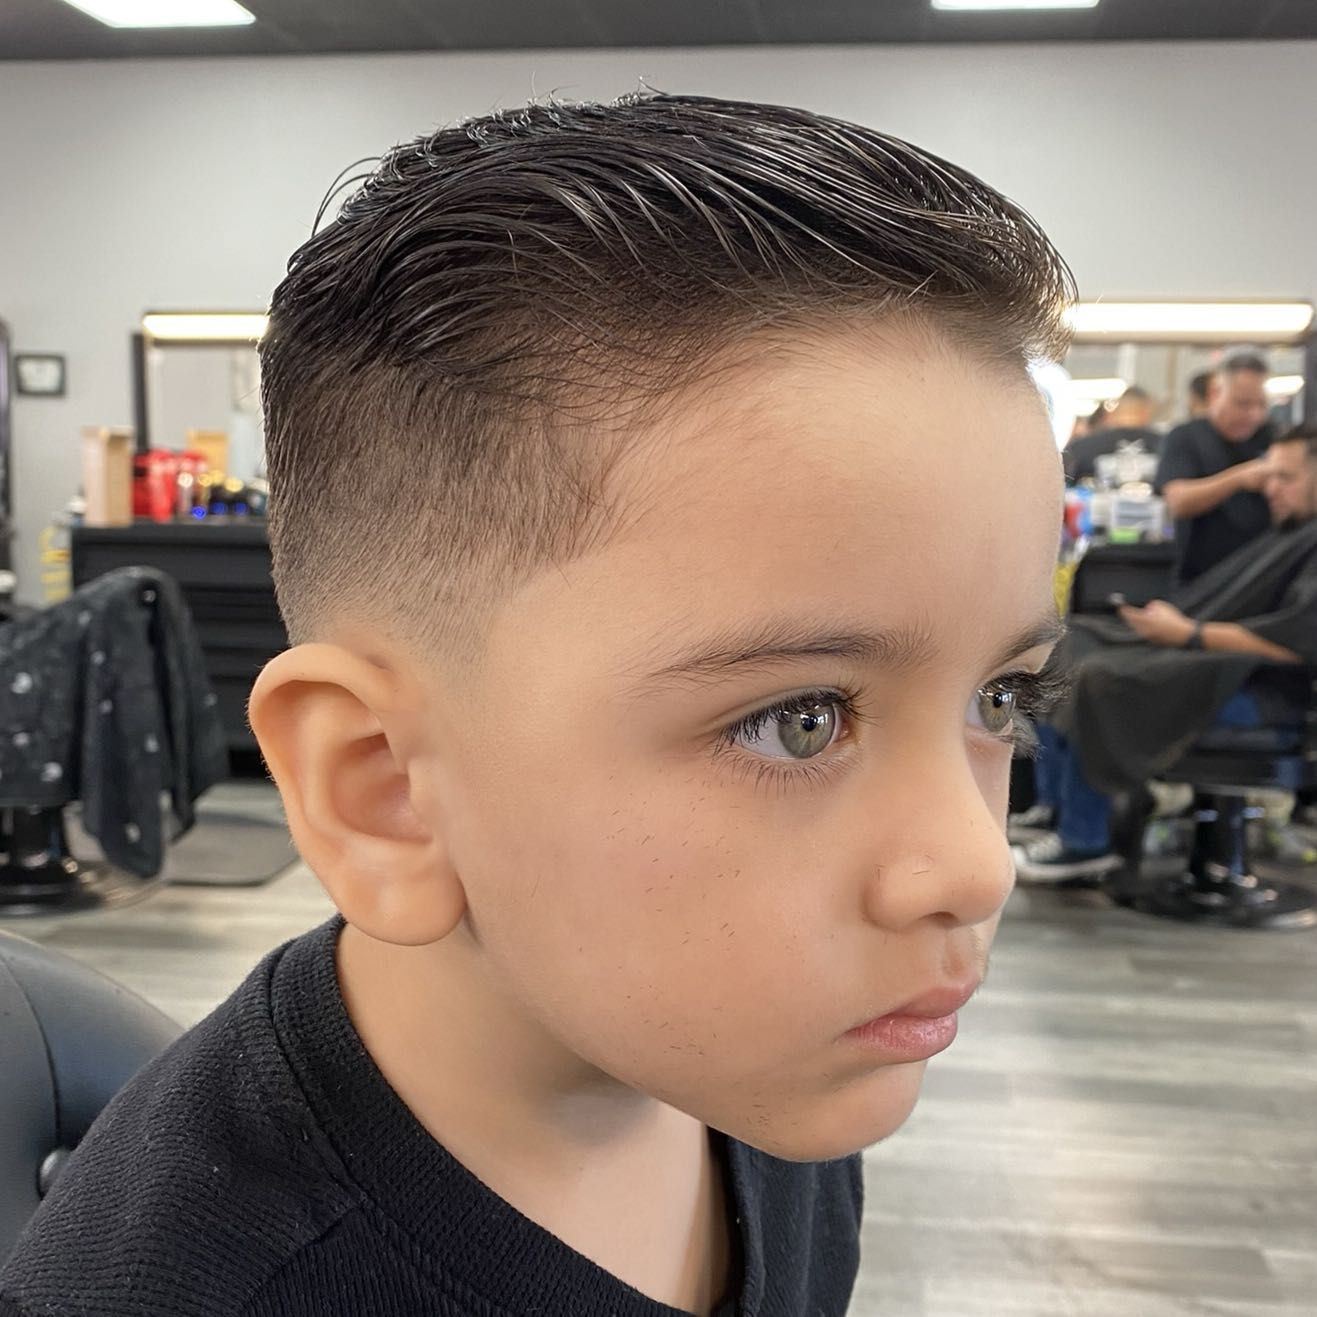 Kids haircut (bald fades, ages 10 and under) portfolio